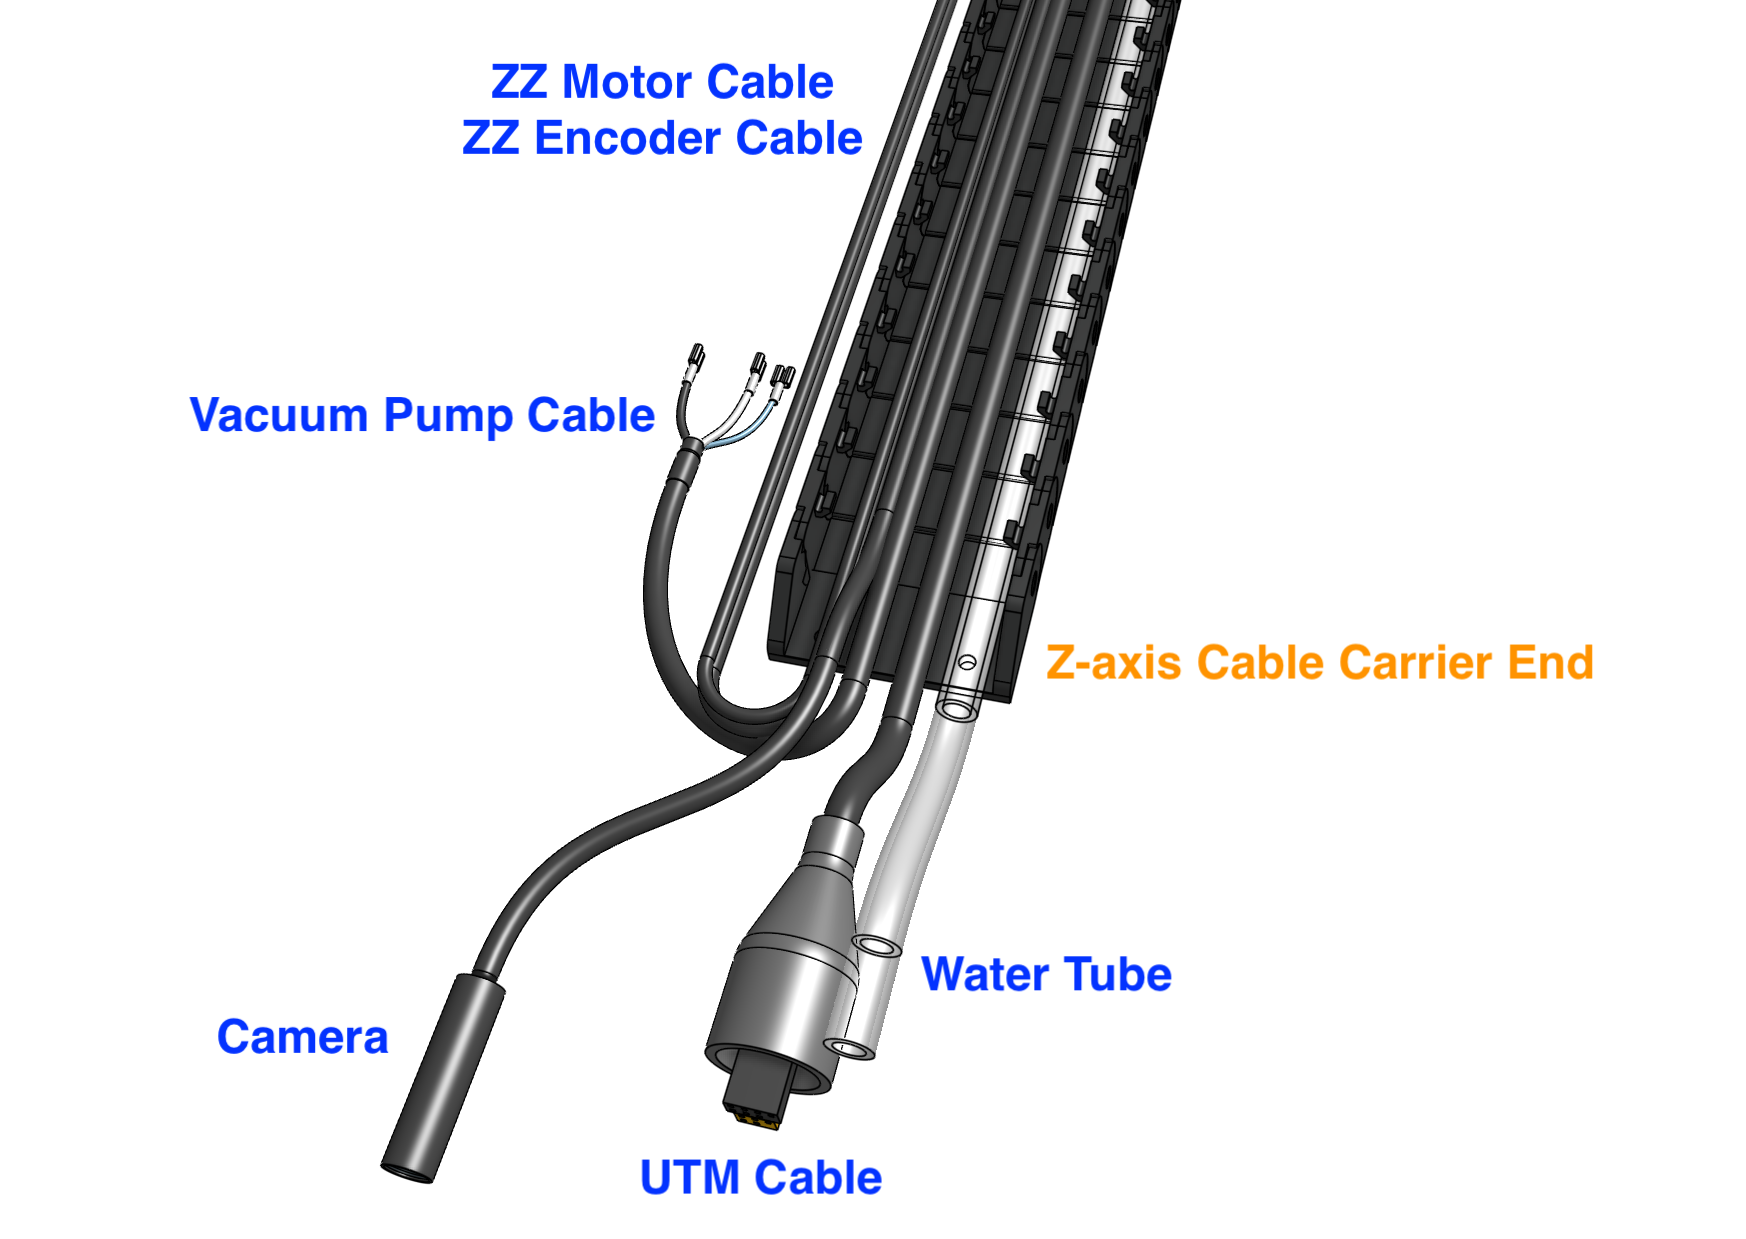 Cables and tube organization